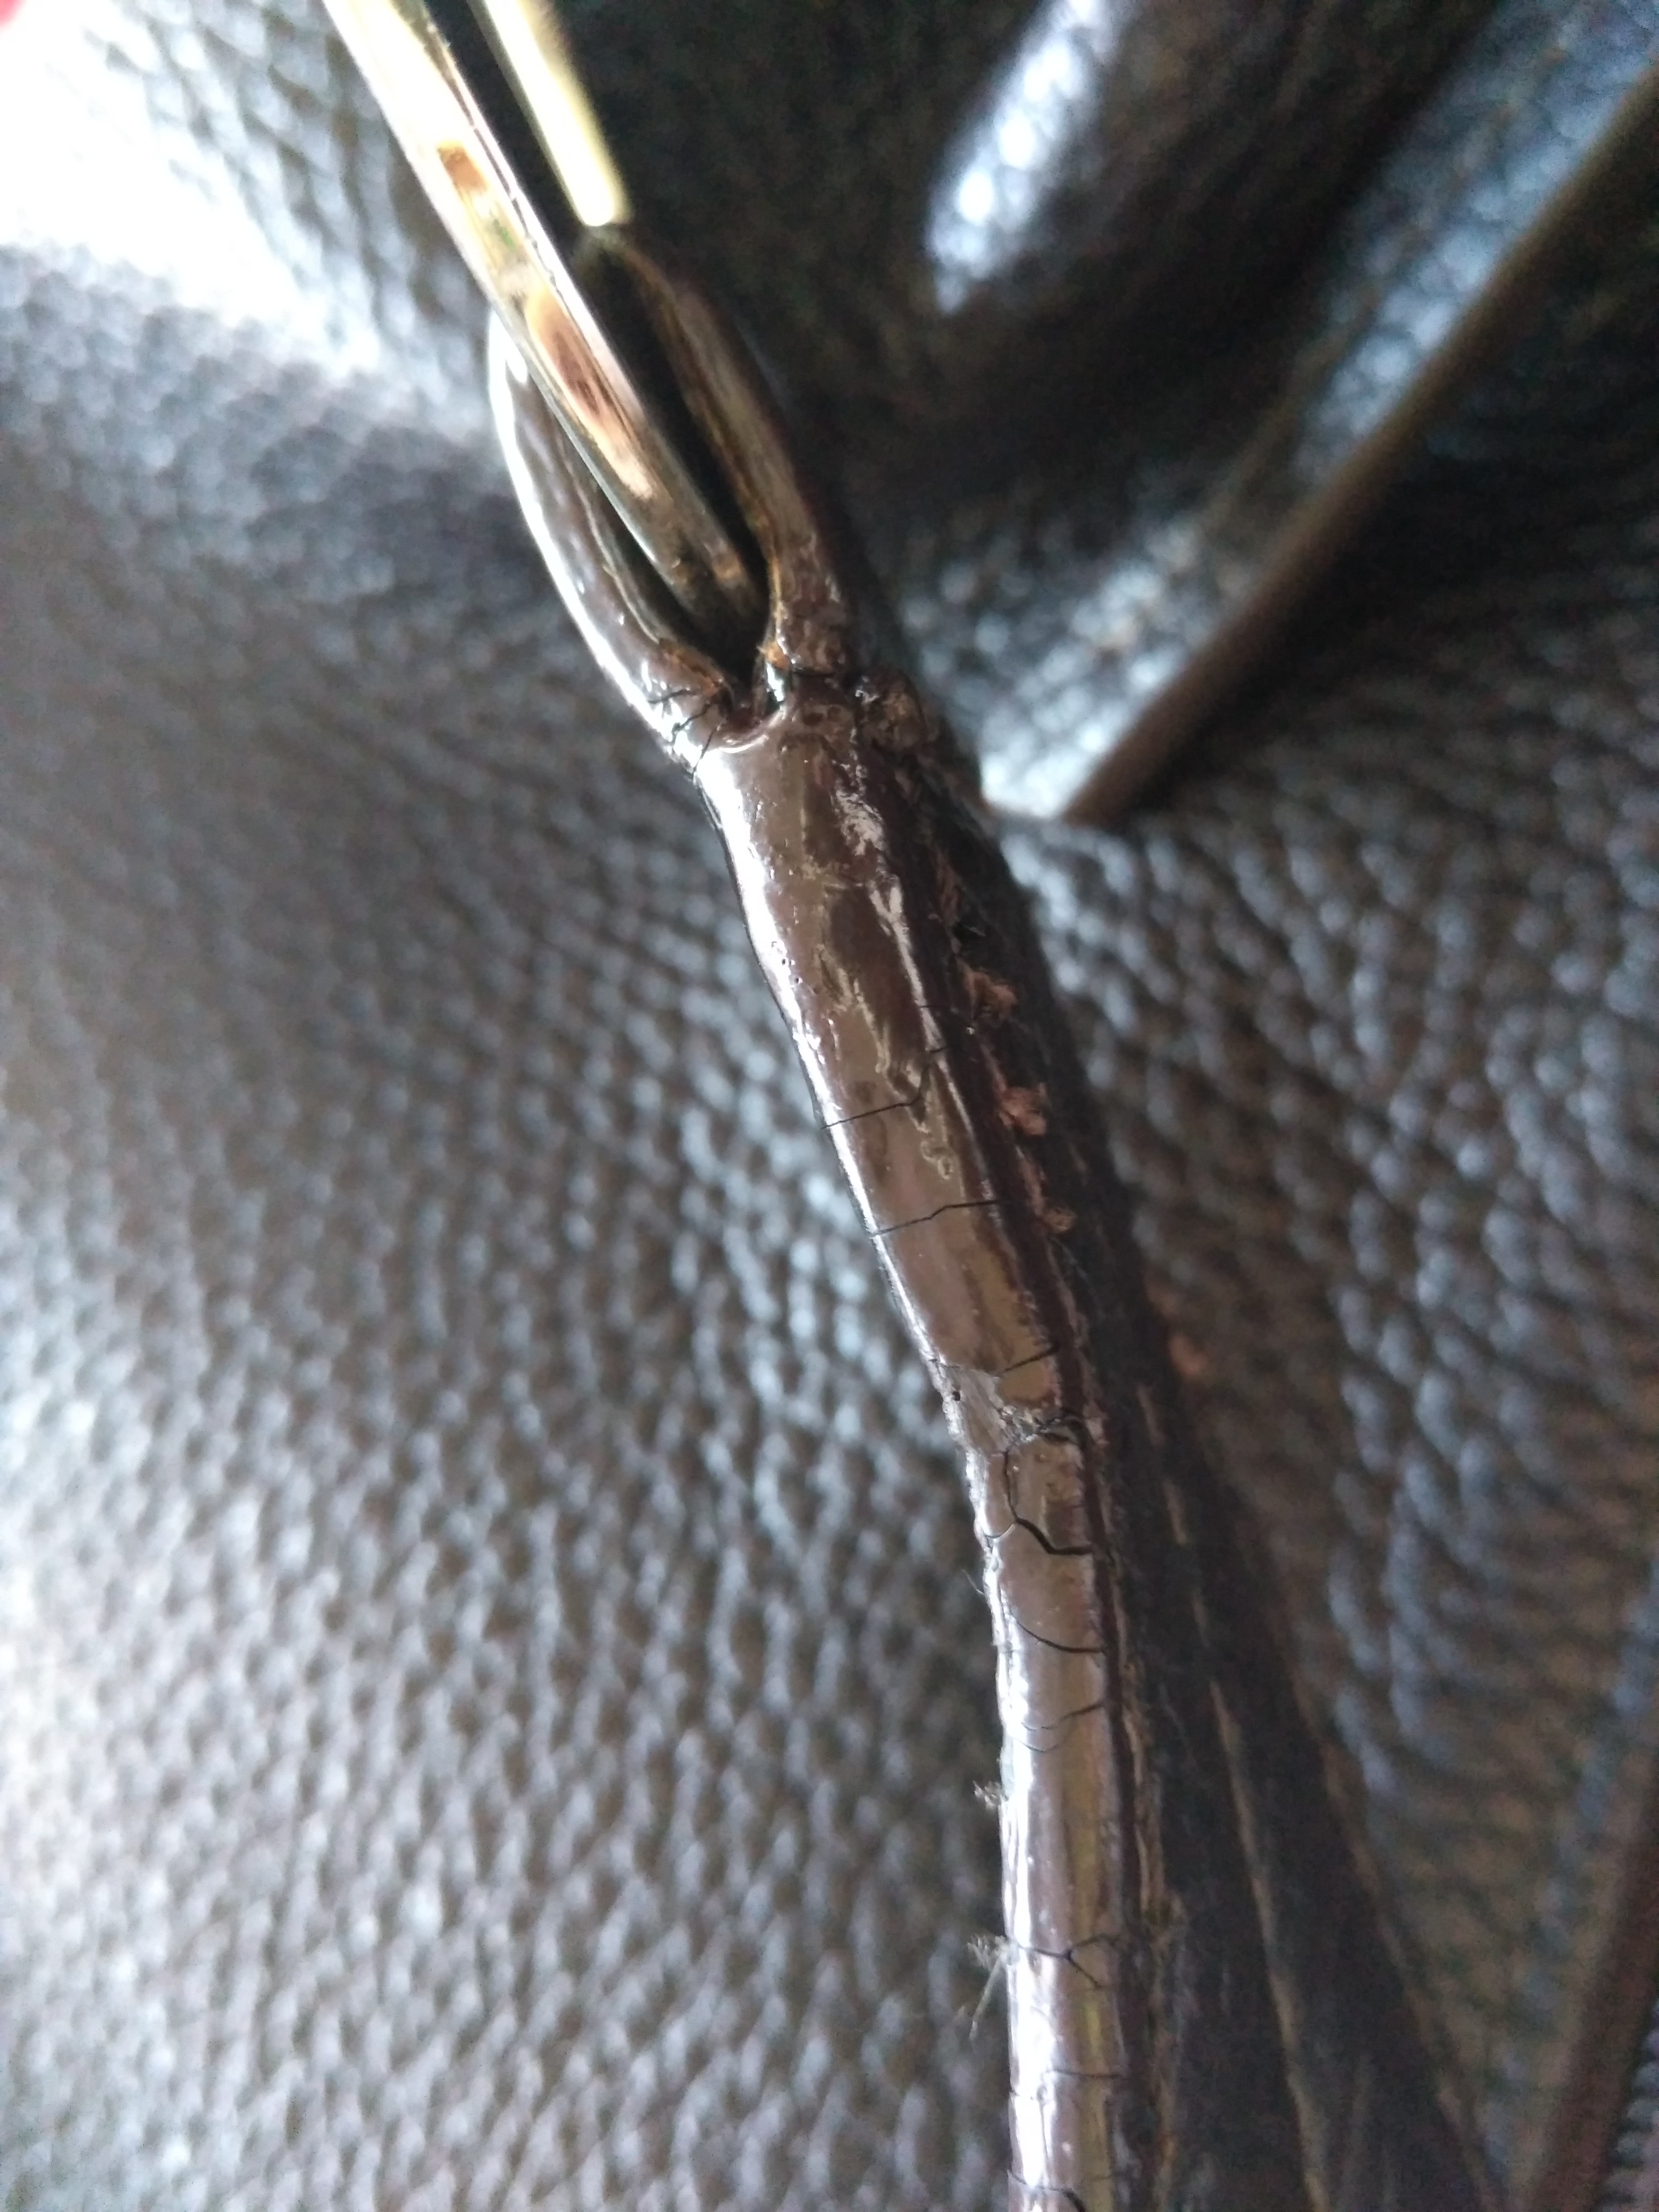 How to Repair Cracking Leather on a Purse Strap